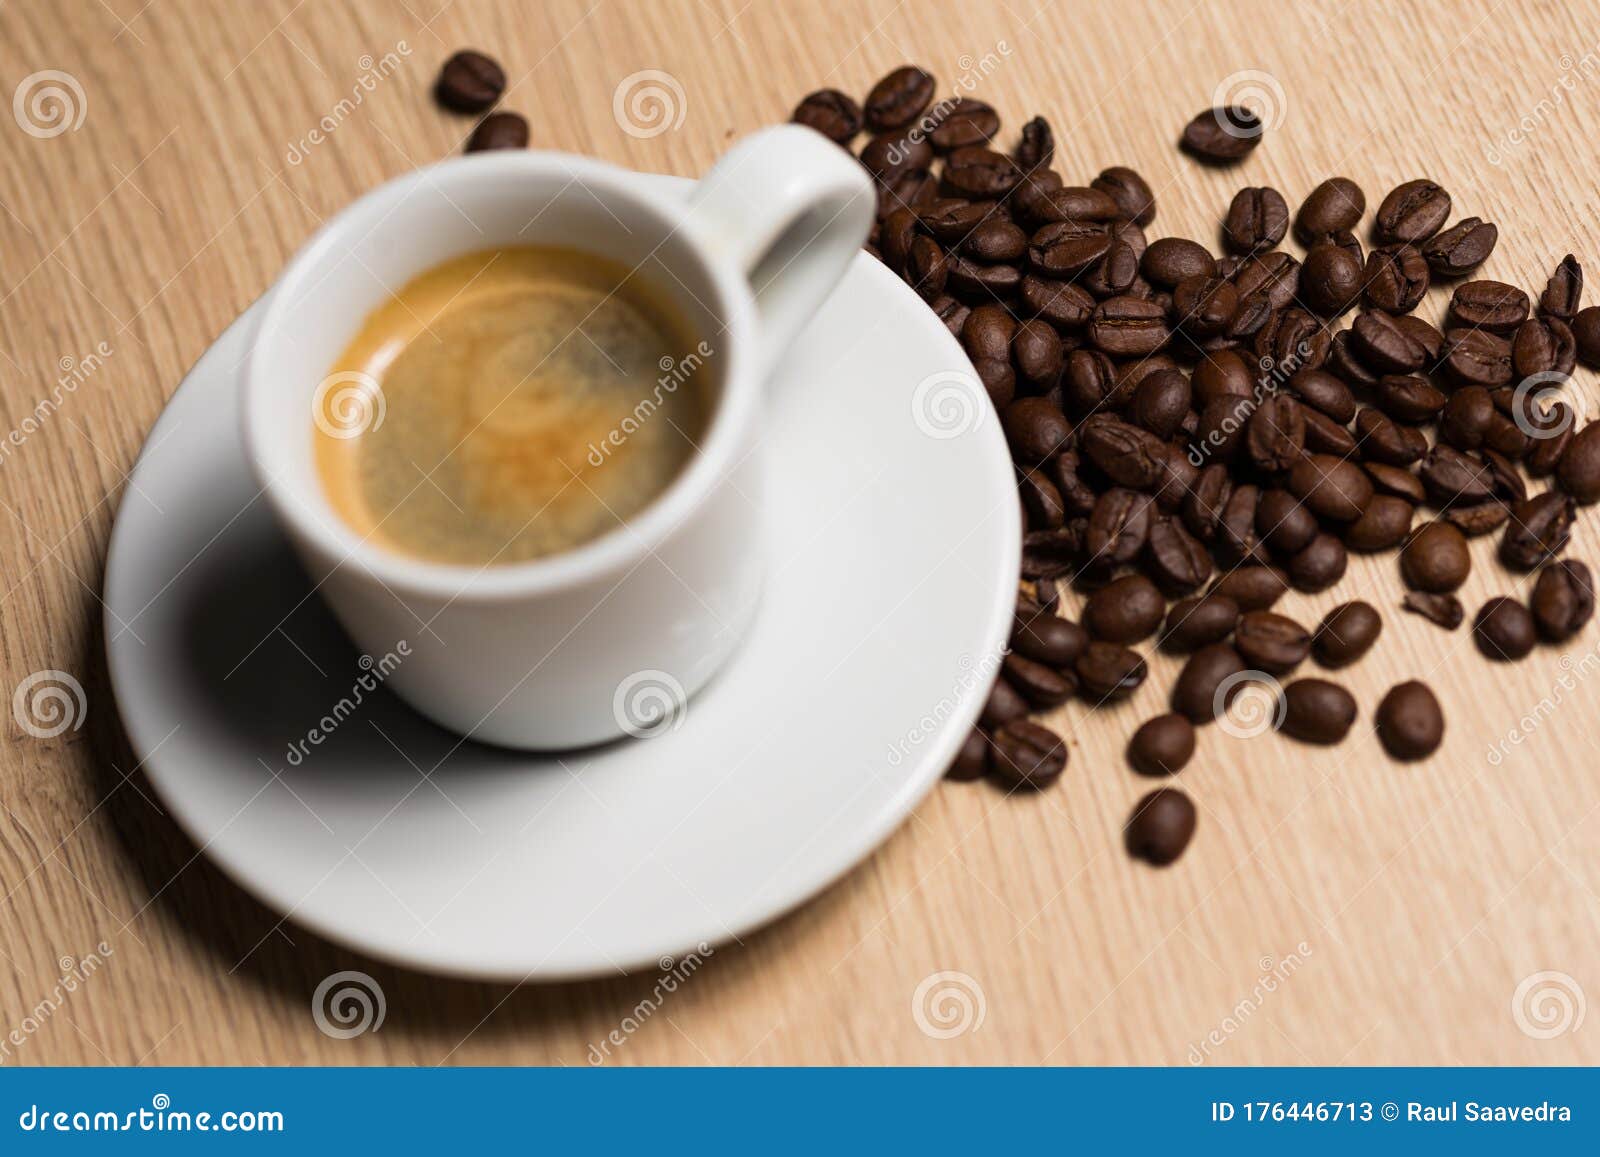 cup of coffee on a wooden table with coffee beans